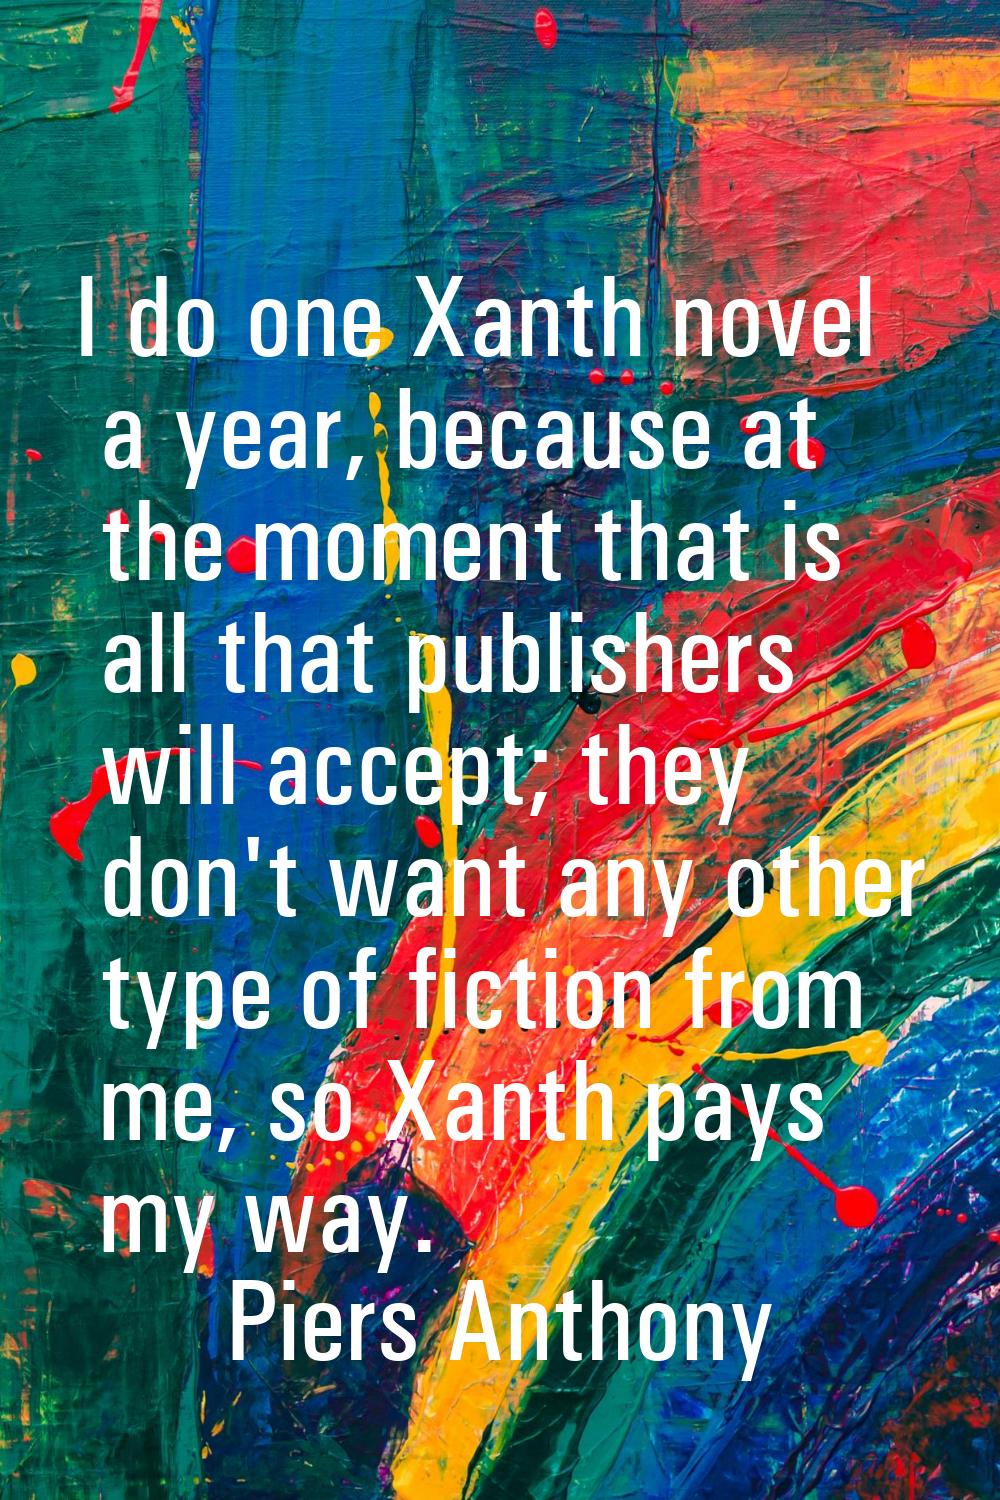 I do one Xanth novel a year, because at the moment that is all that publishers will accept; they do